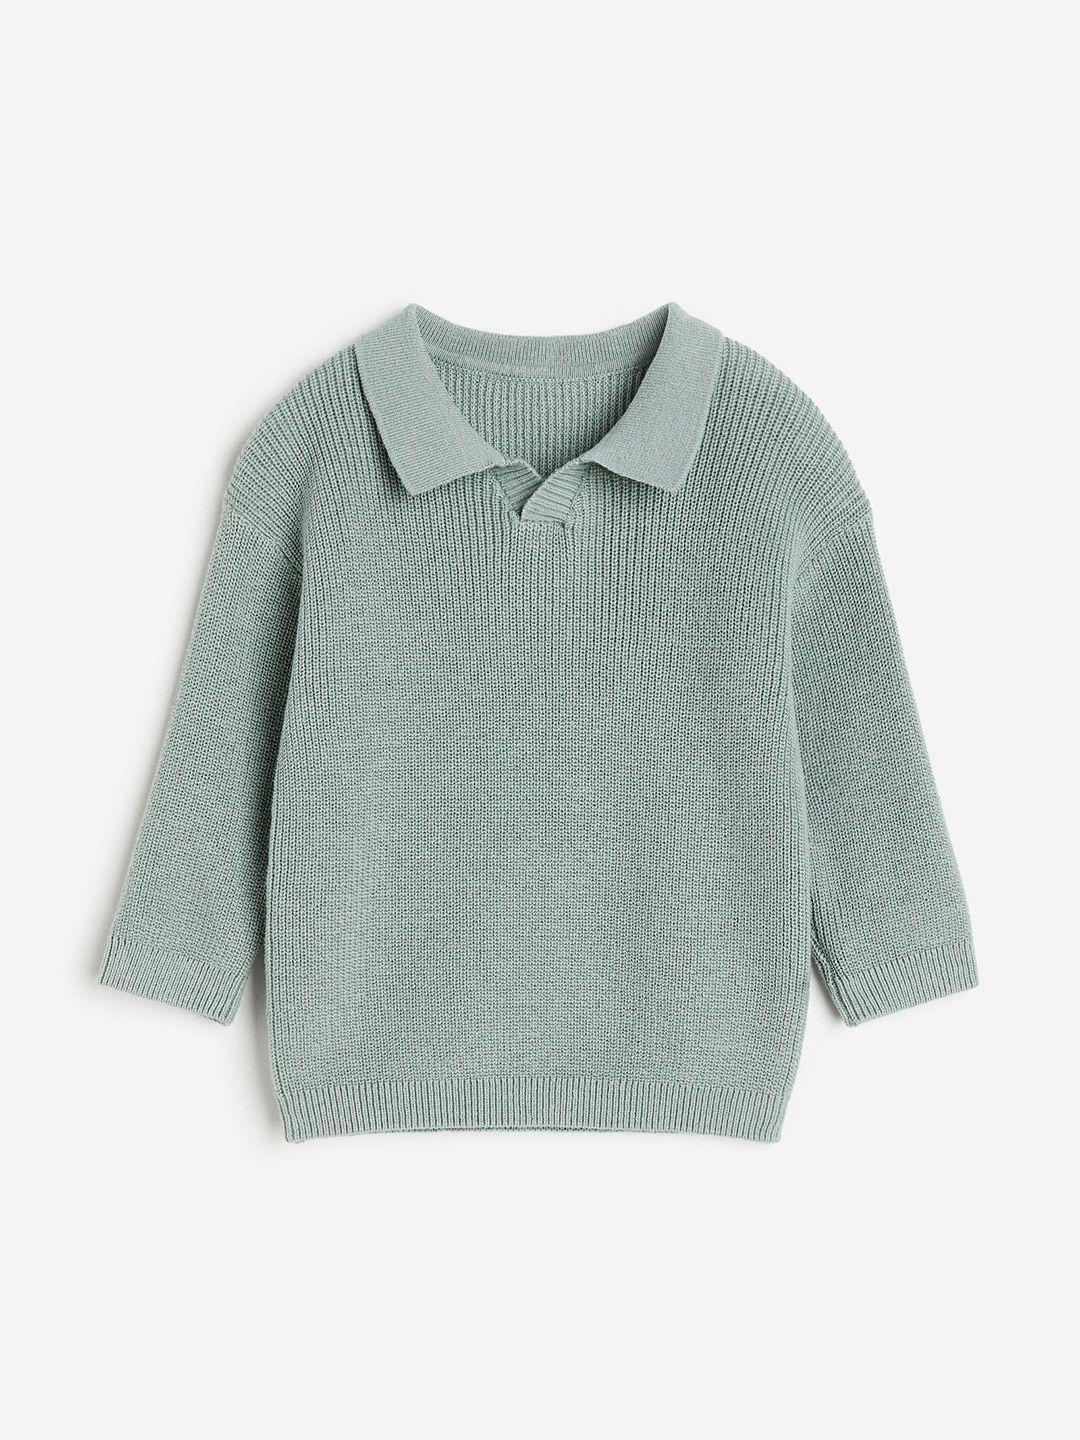 h&m boys ribbed cotton collared jumper